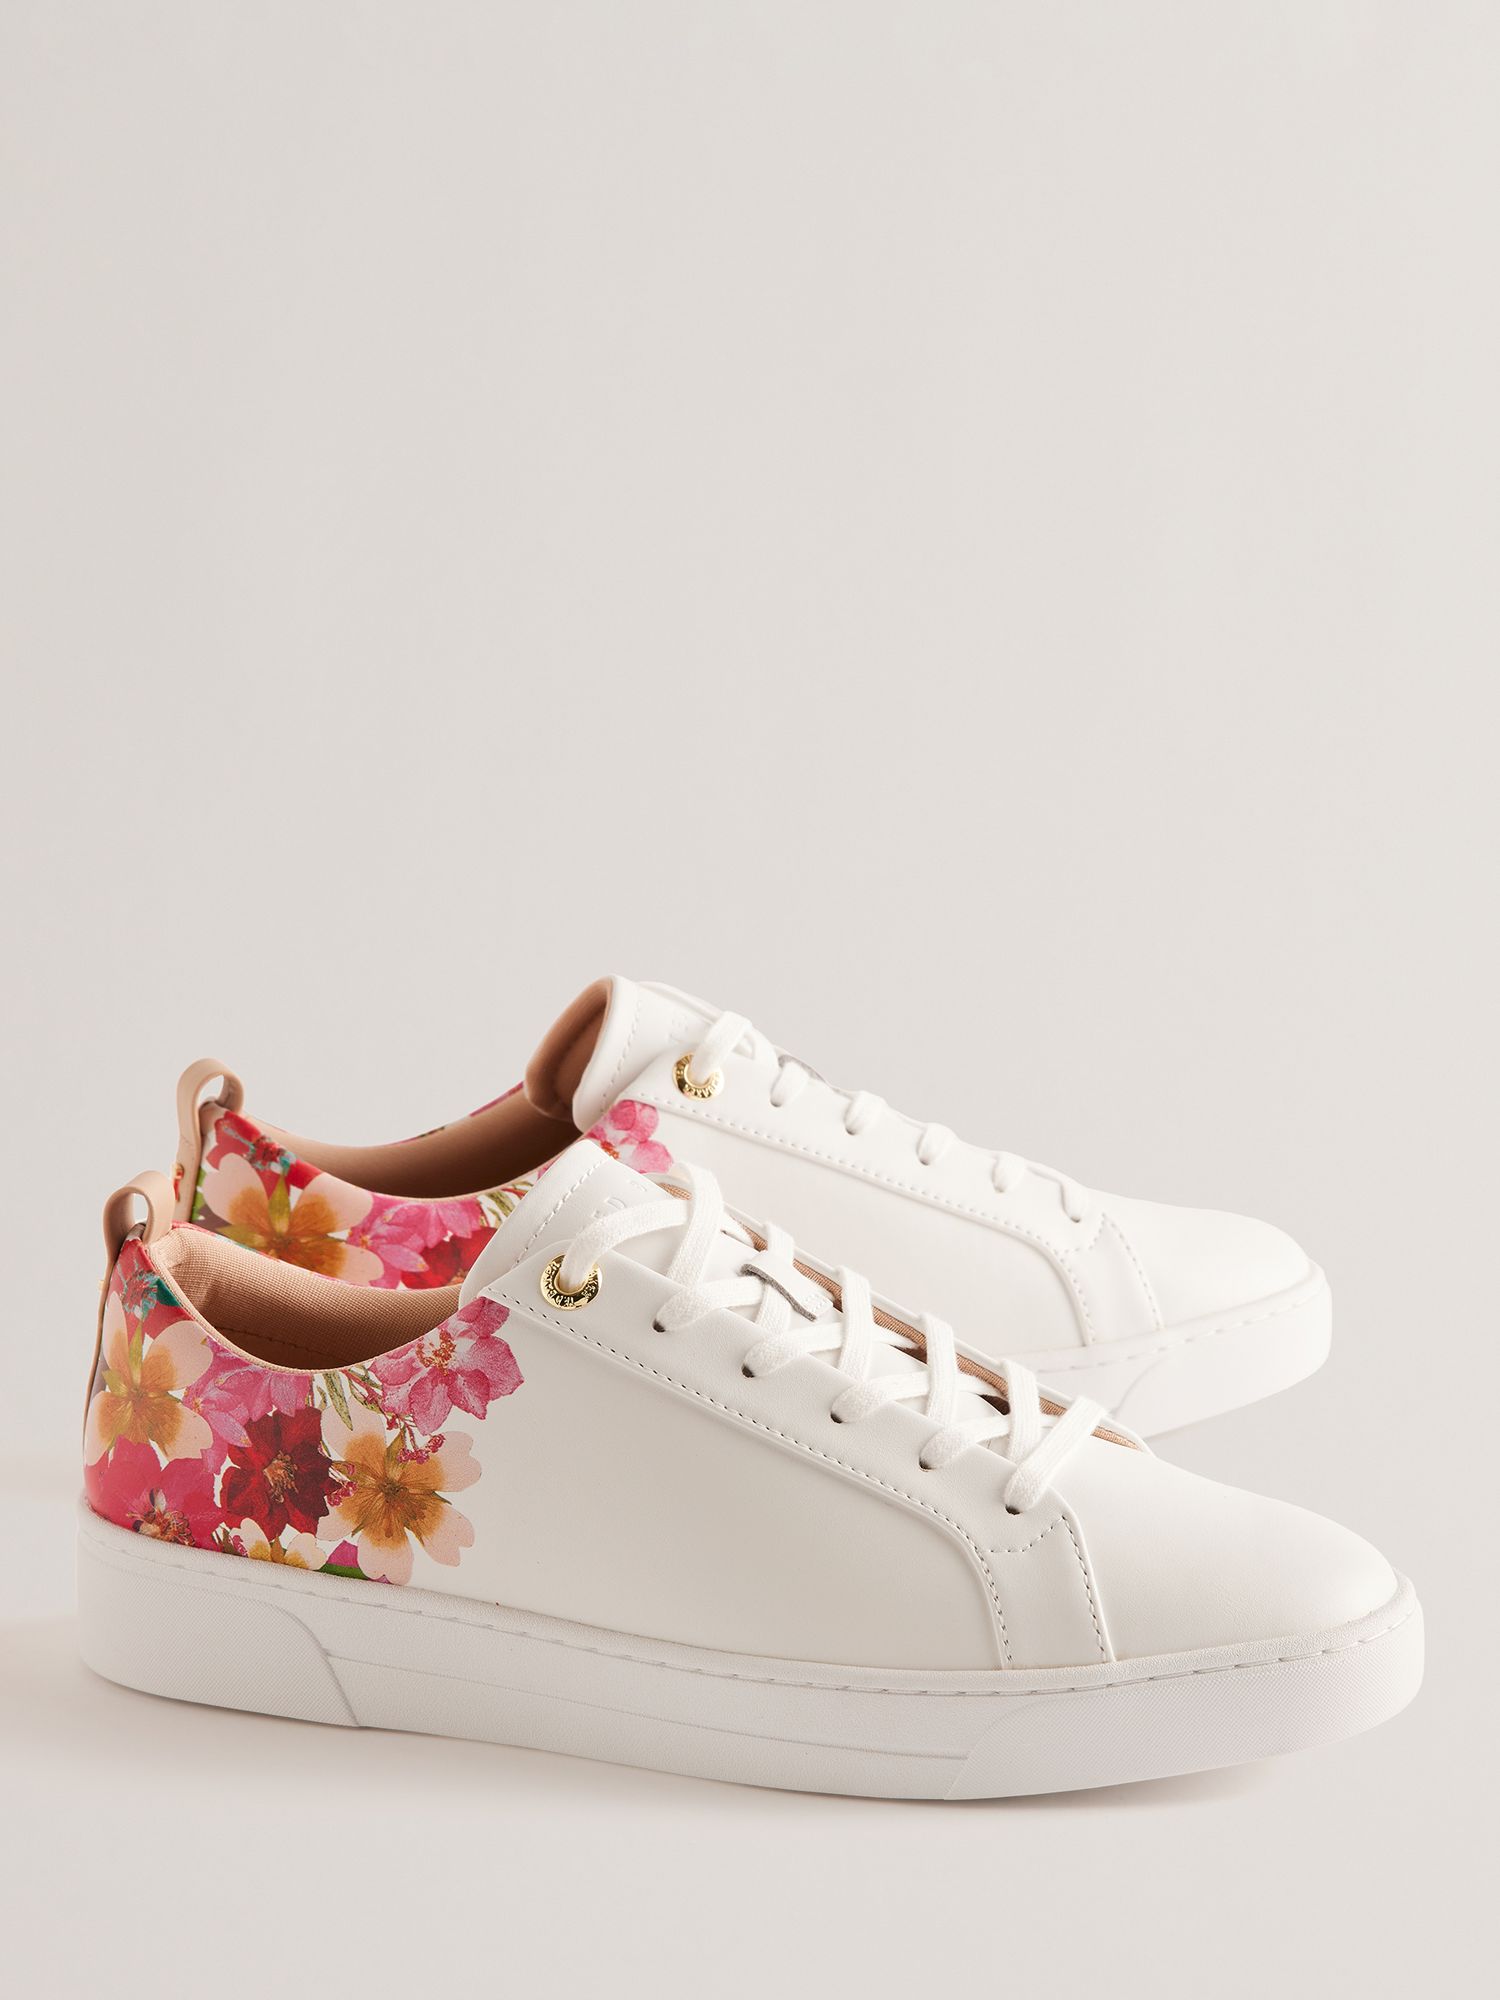 Ted Baker Alissn Floral Leather Cupsole Trainers, White/Multi, EU37